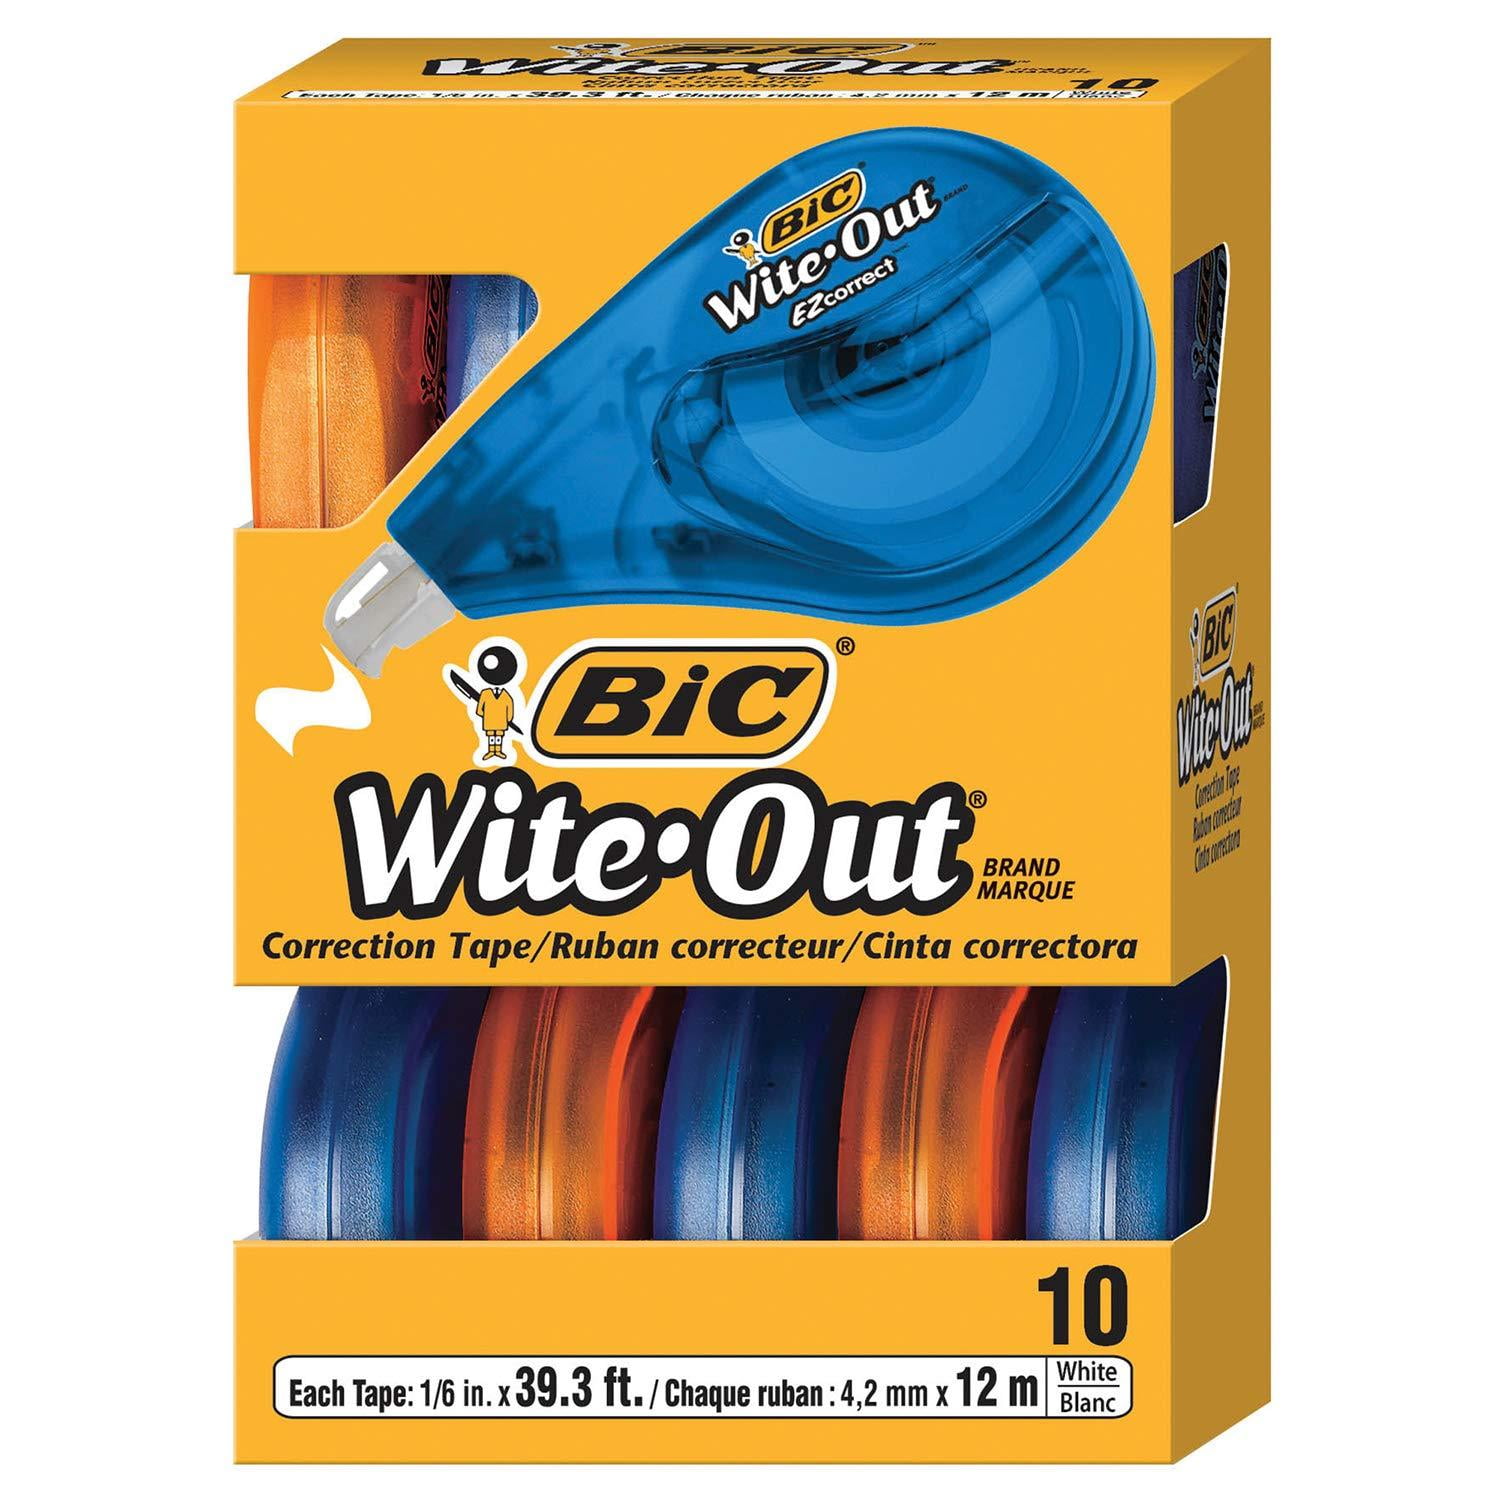 Bic Wite Out Brand Ez Correct Correction Tape White 10 Count 10 Count